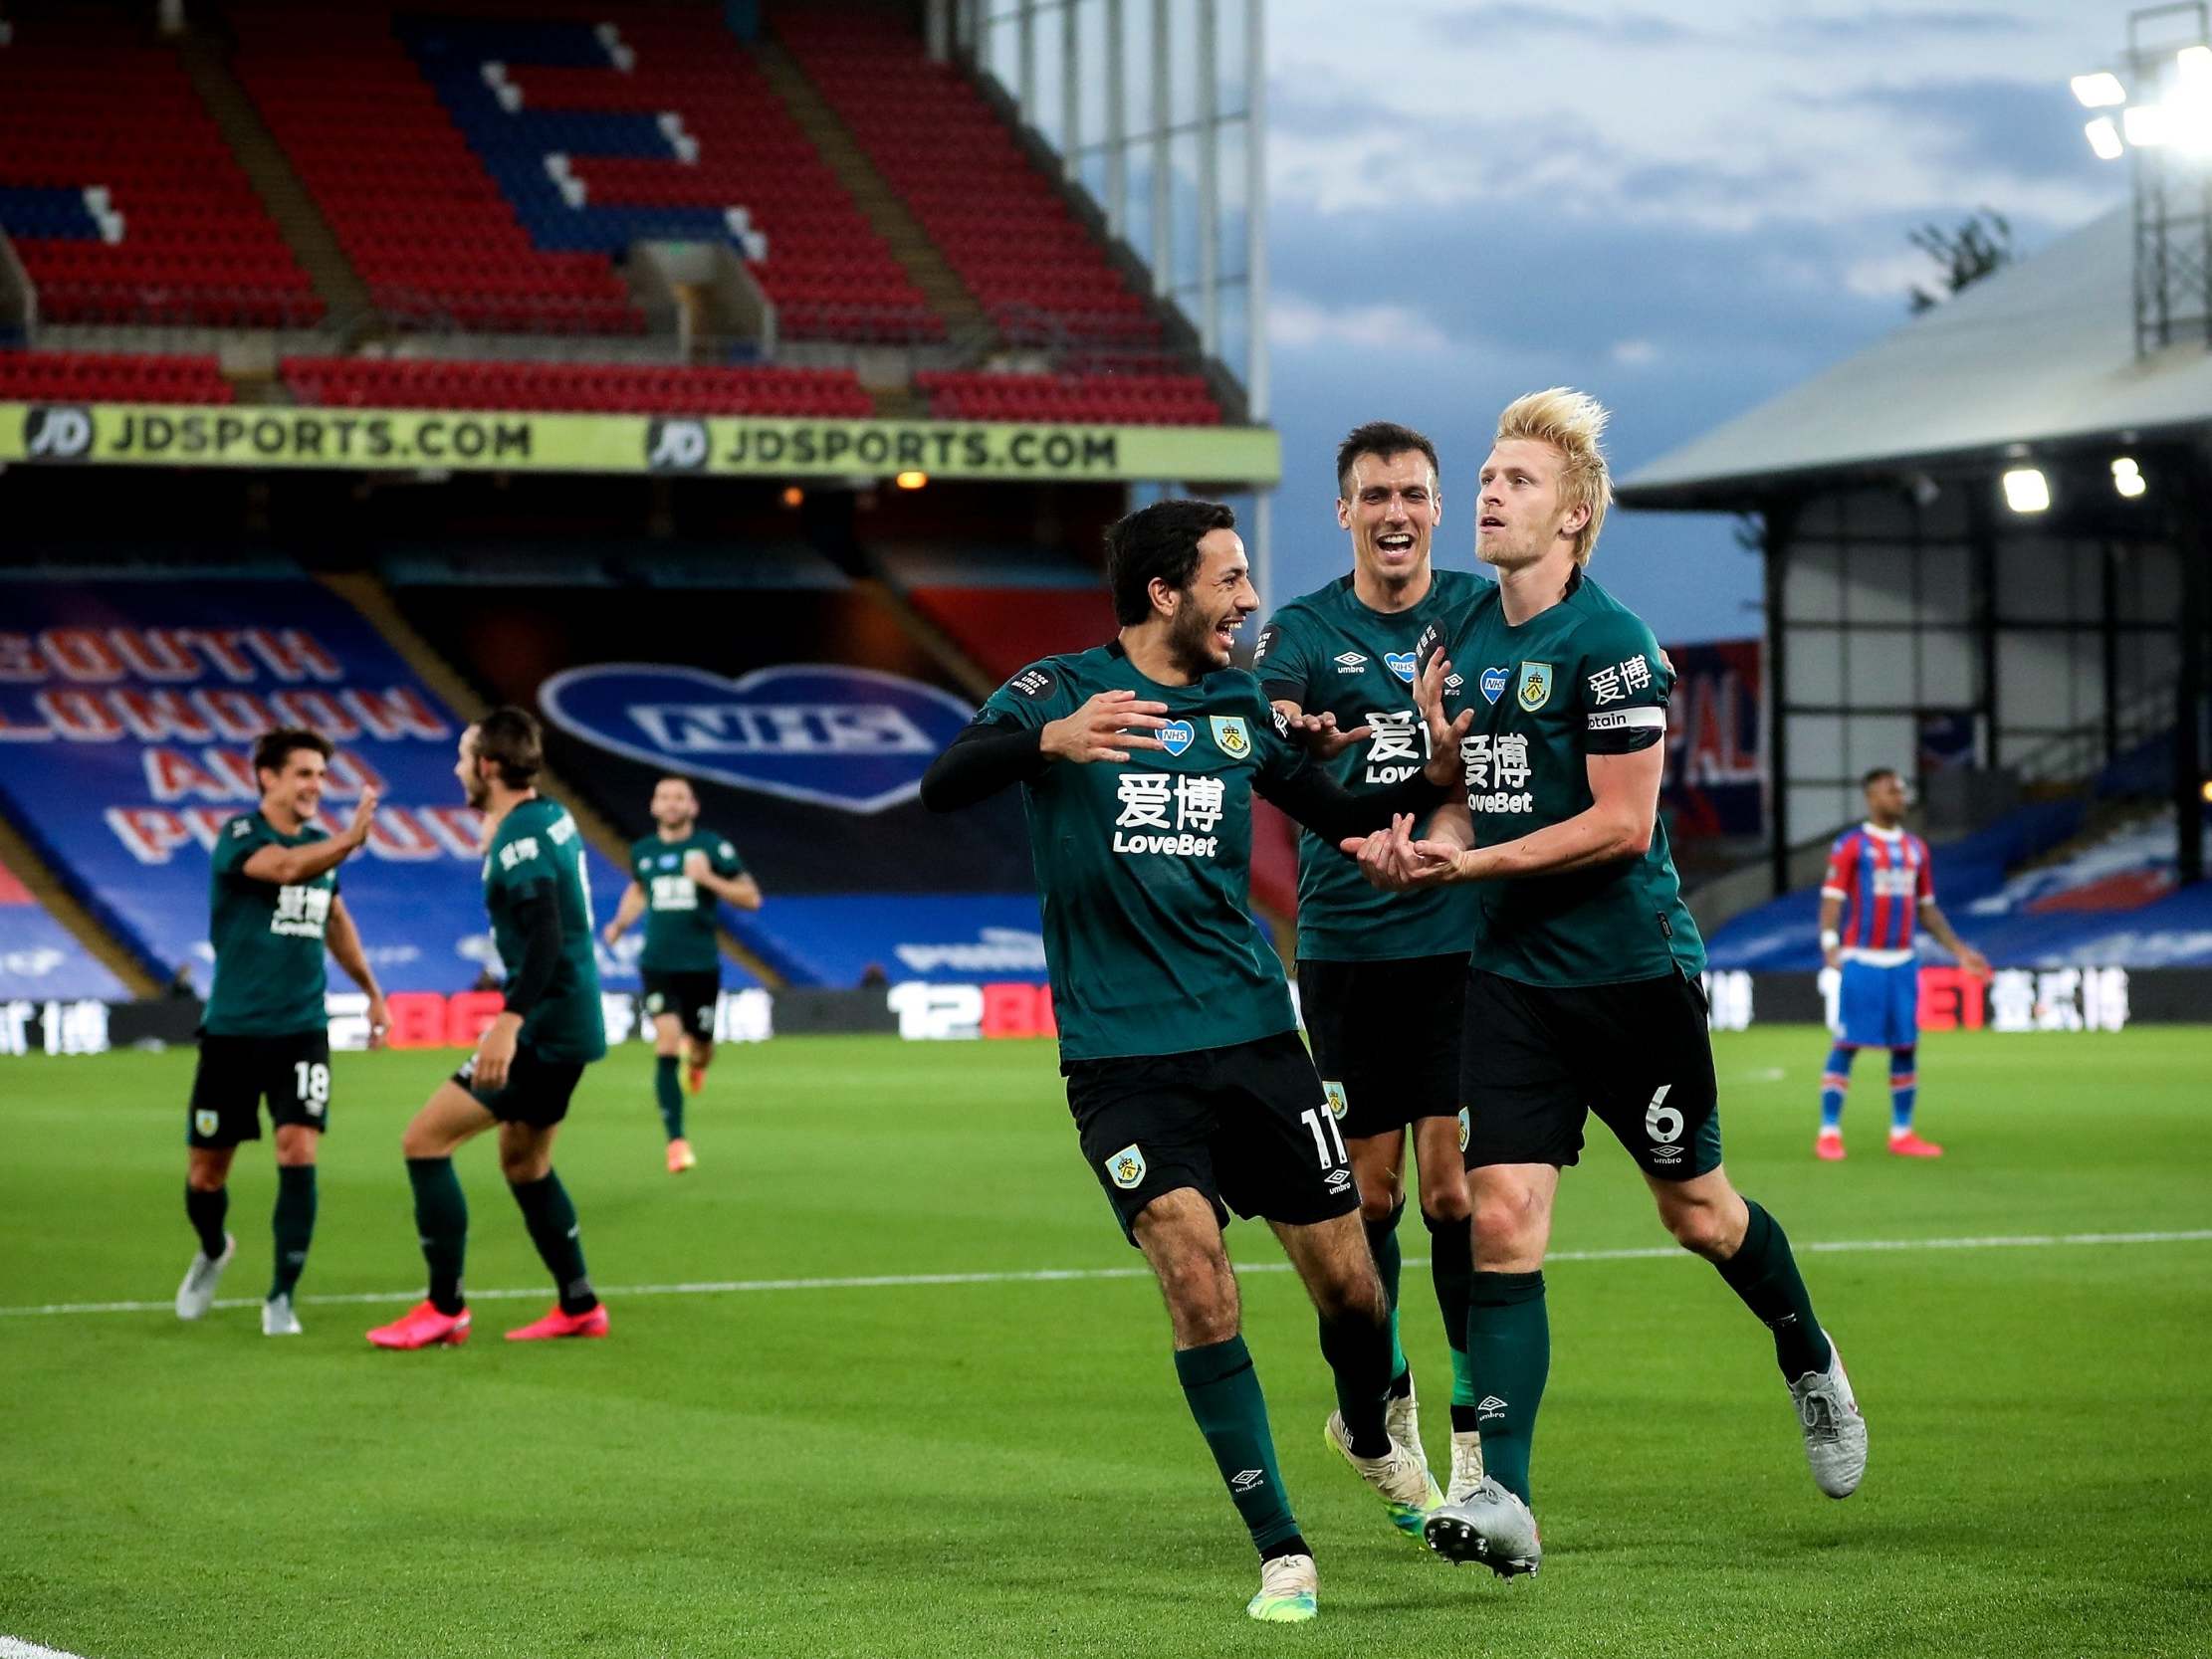 Crystal Palace vs Burnley result: Ben Mee's diving header lifts Clarets into Europa League contention